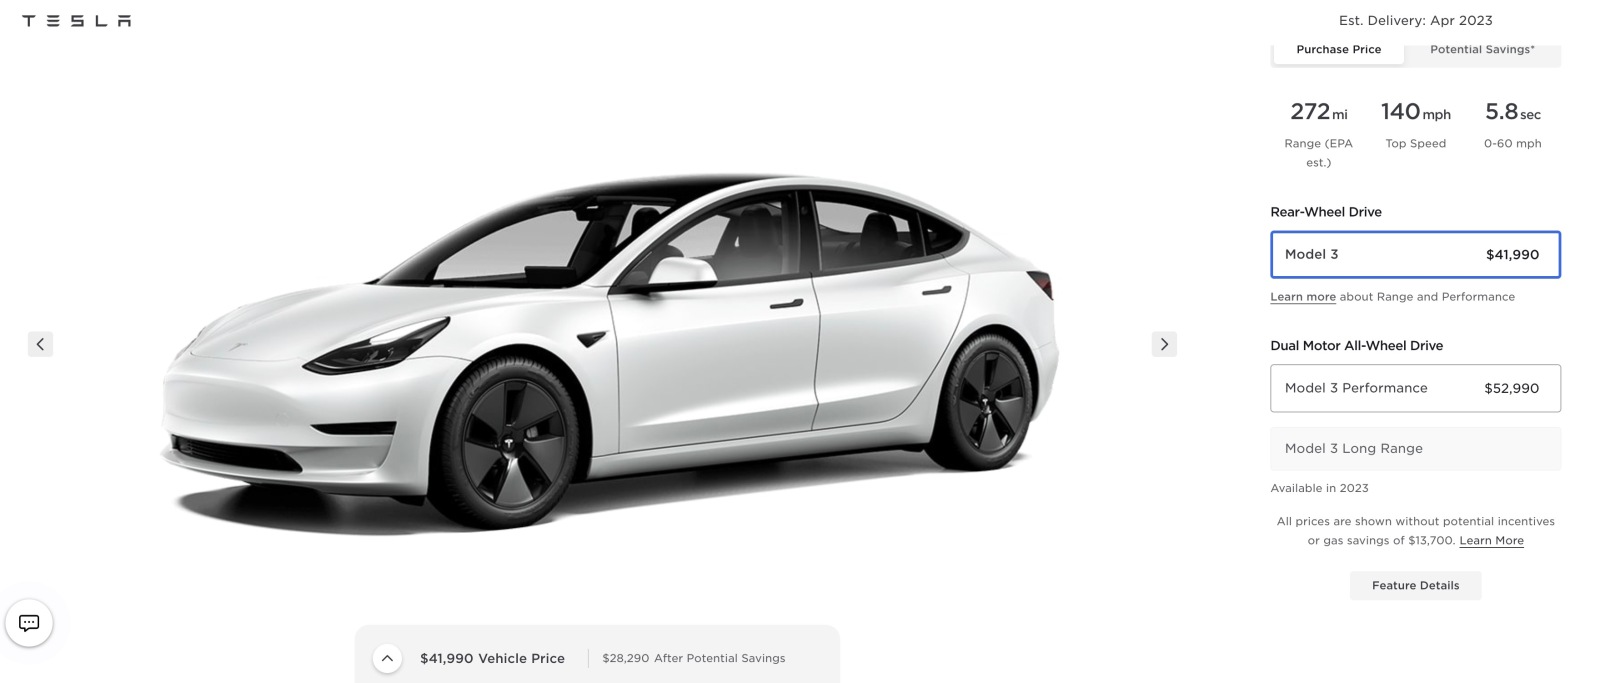 Tesla Model 3 prices April 2023 - Tesla Surprises the Market with Series of Price Reductions on Entire Car Lineup to Keep Up with Competition